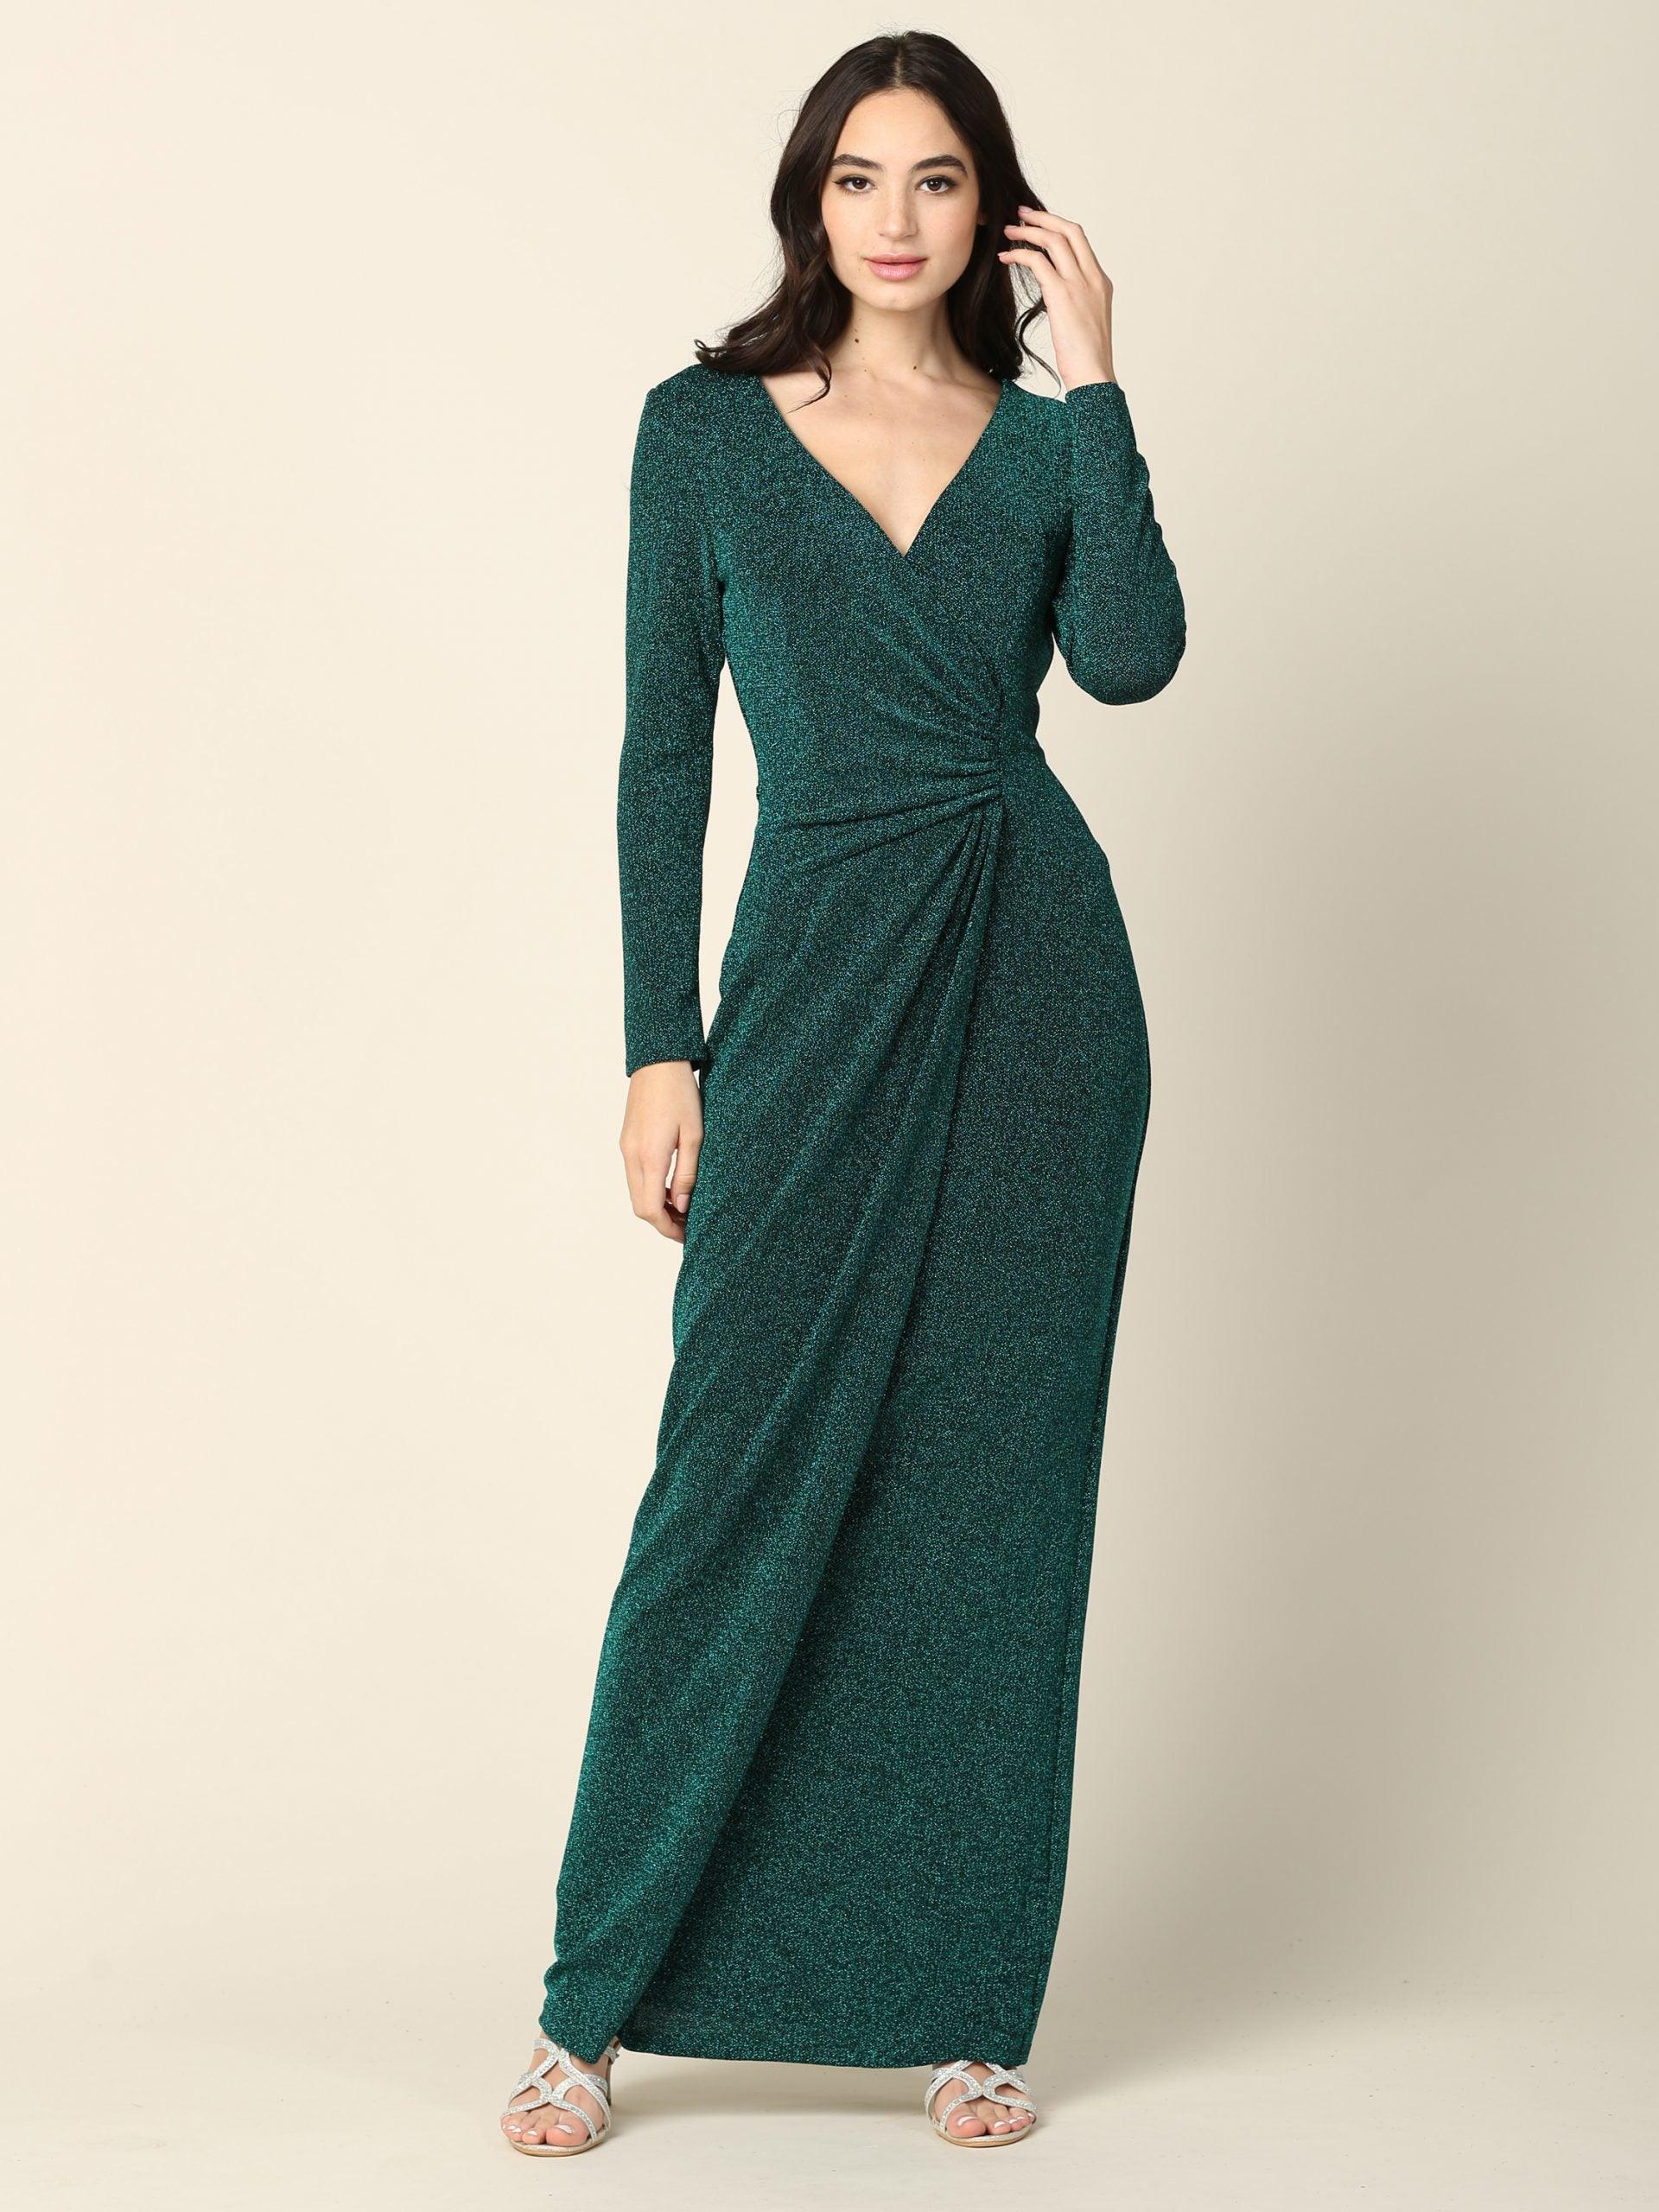 Long Mother of the Bride Formal Metallic Dress - The Dress Outlet